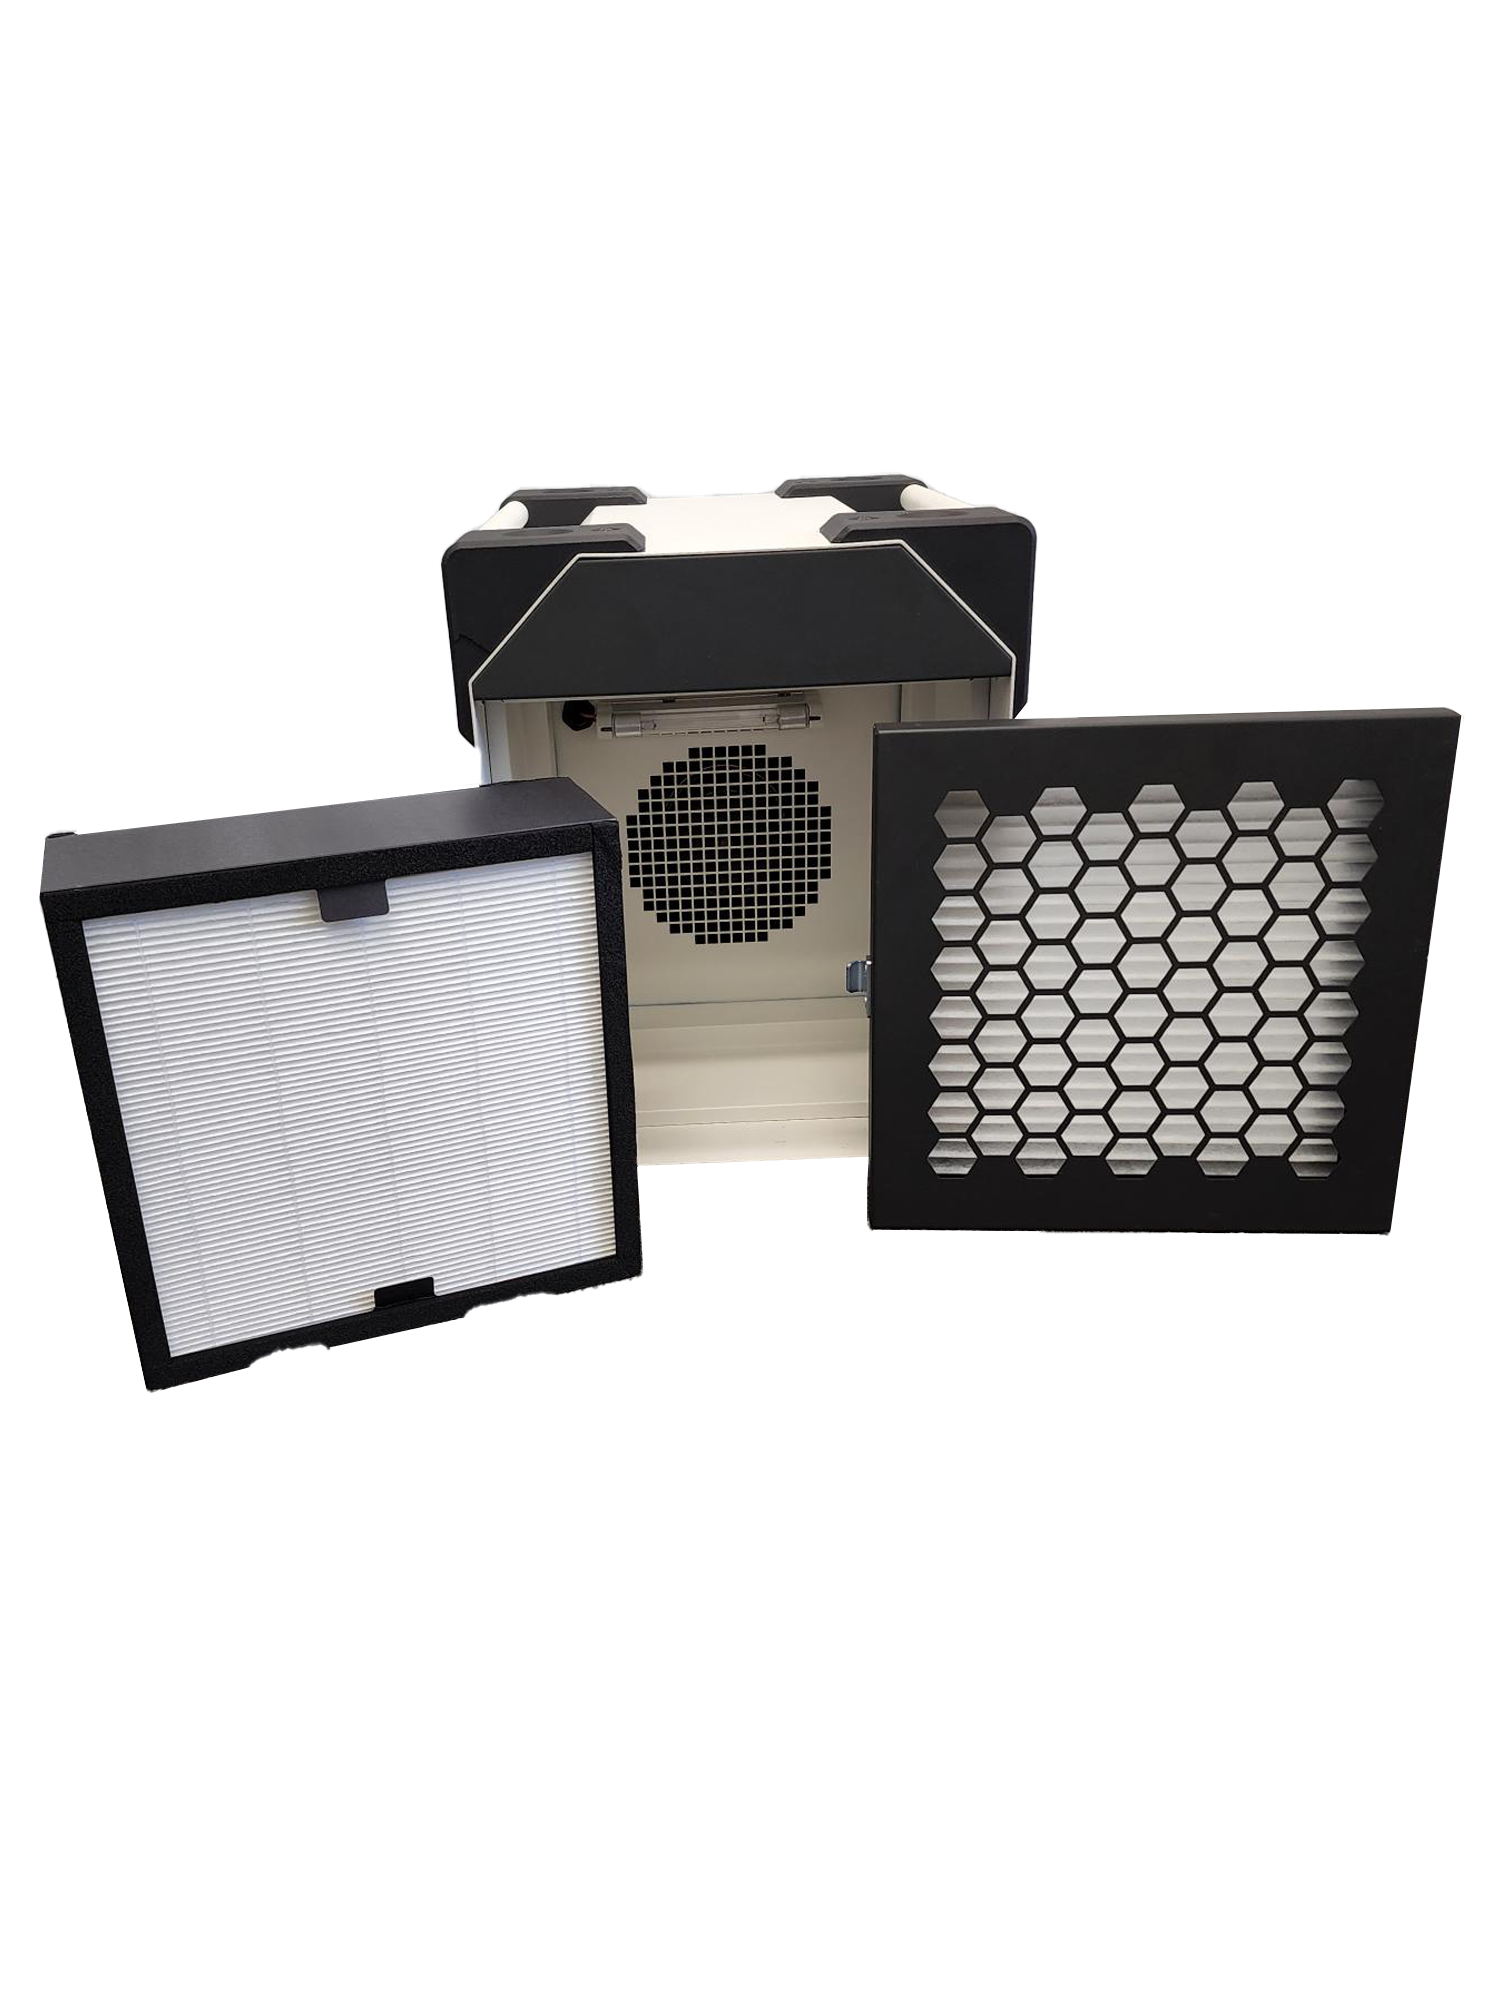 Air Scrubber Purifier / Industrial Heating Cooling Ventilation Distribution Fans Warehouse Australia / Fanmaster